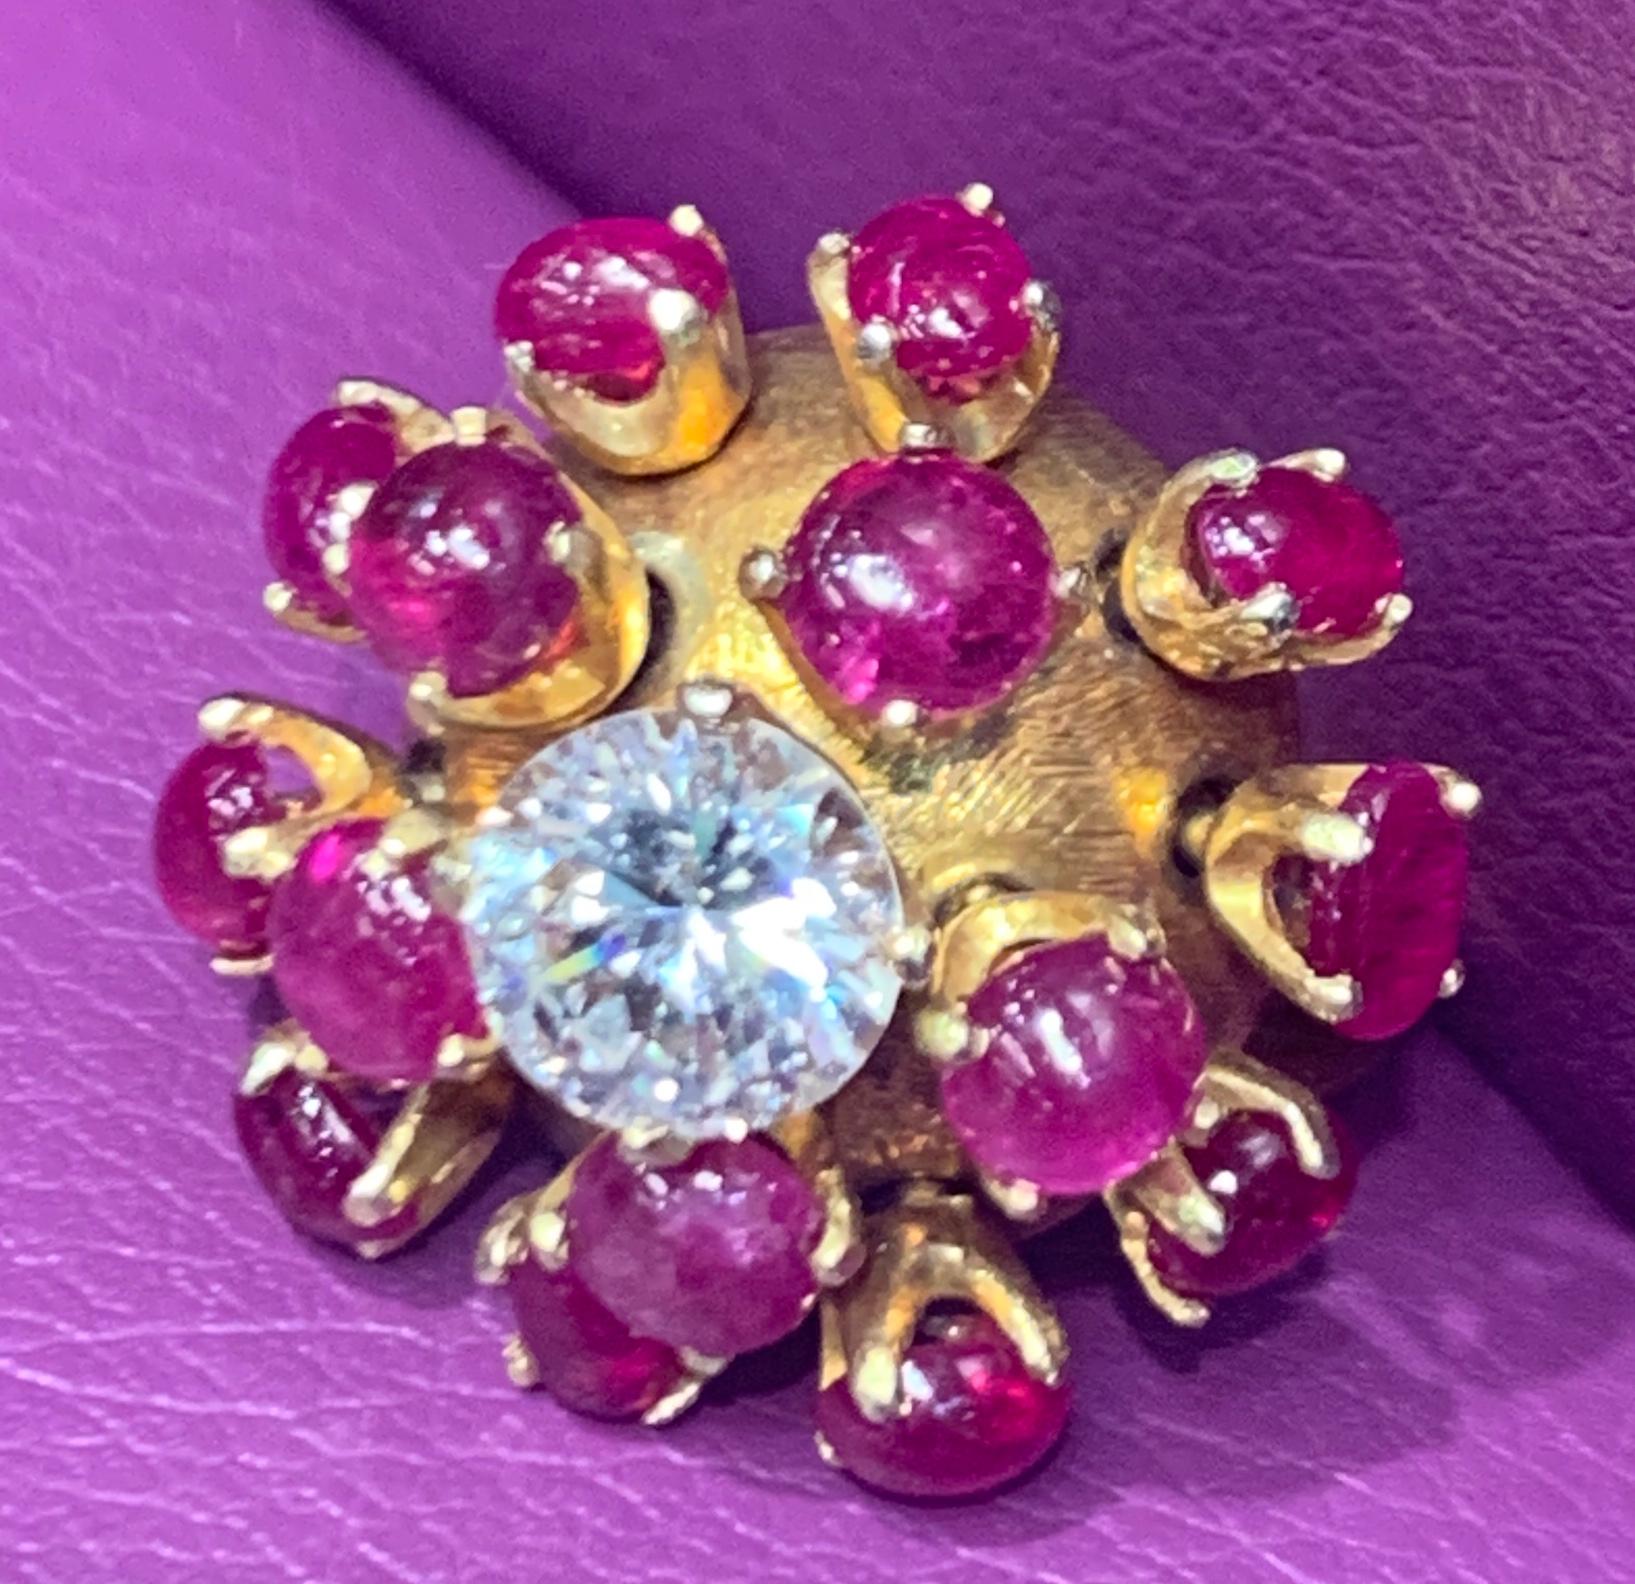 Ruby & Diamond En Tremblant Cocktail Ring 14K Yellow Gold Circa 1960
Diamond Weight: 1.80 Cts
Ruby Weight: 6.70 Cts
Ring Size: 5.5
Re-sizable free of charge 